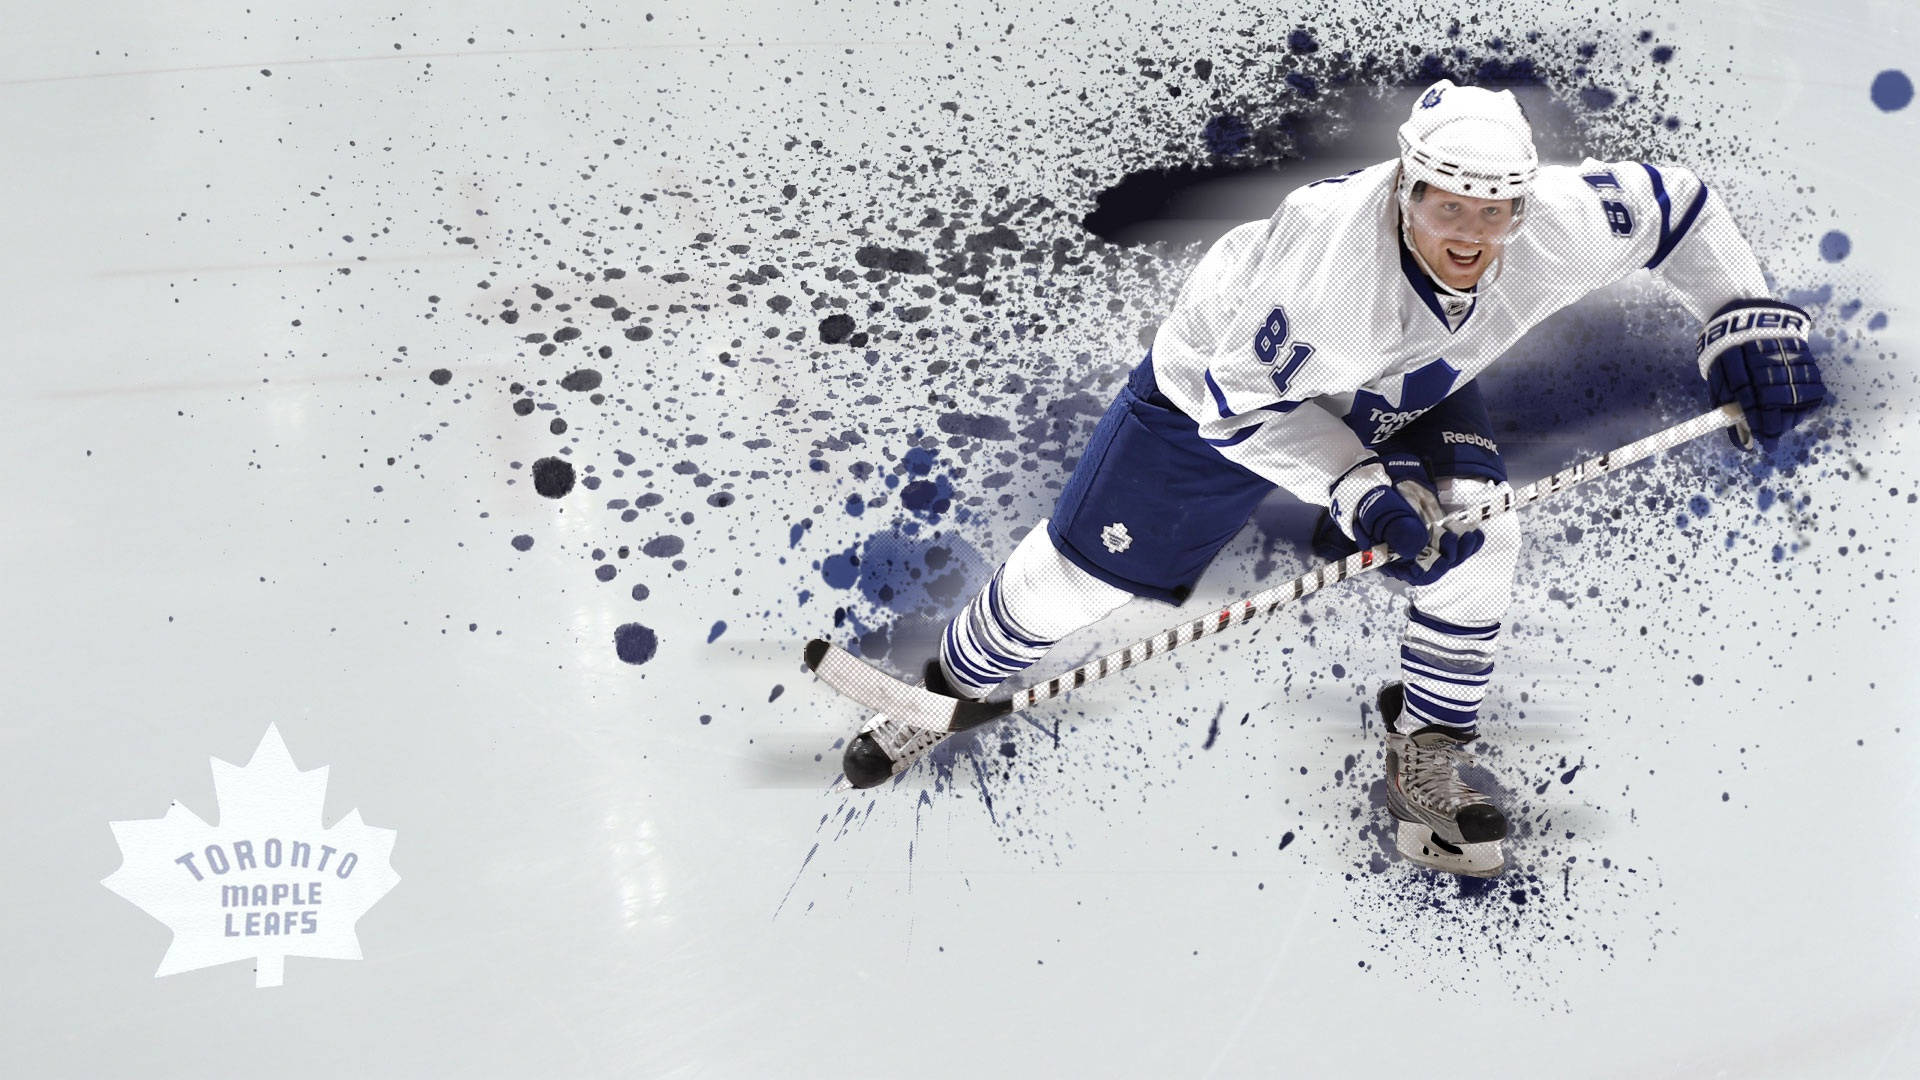 Toronto Maple Leafs Player Number 81 Wallpaper